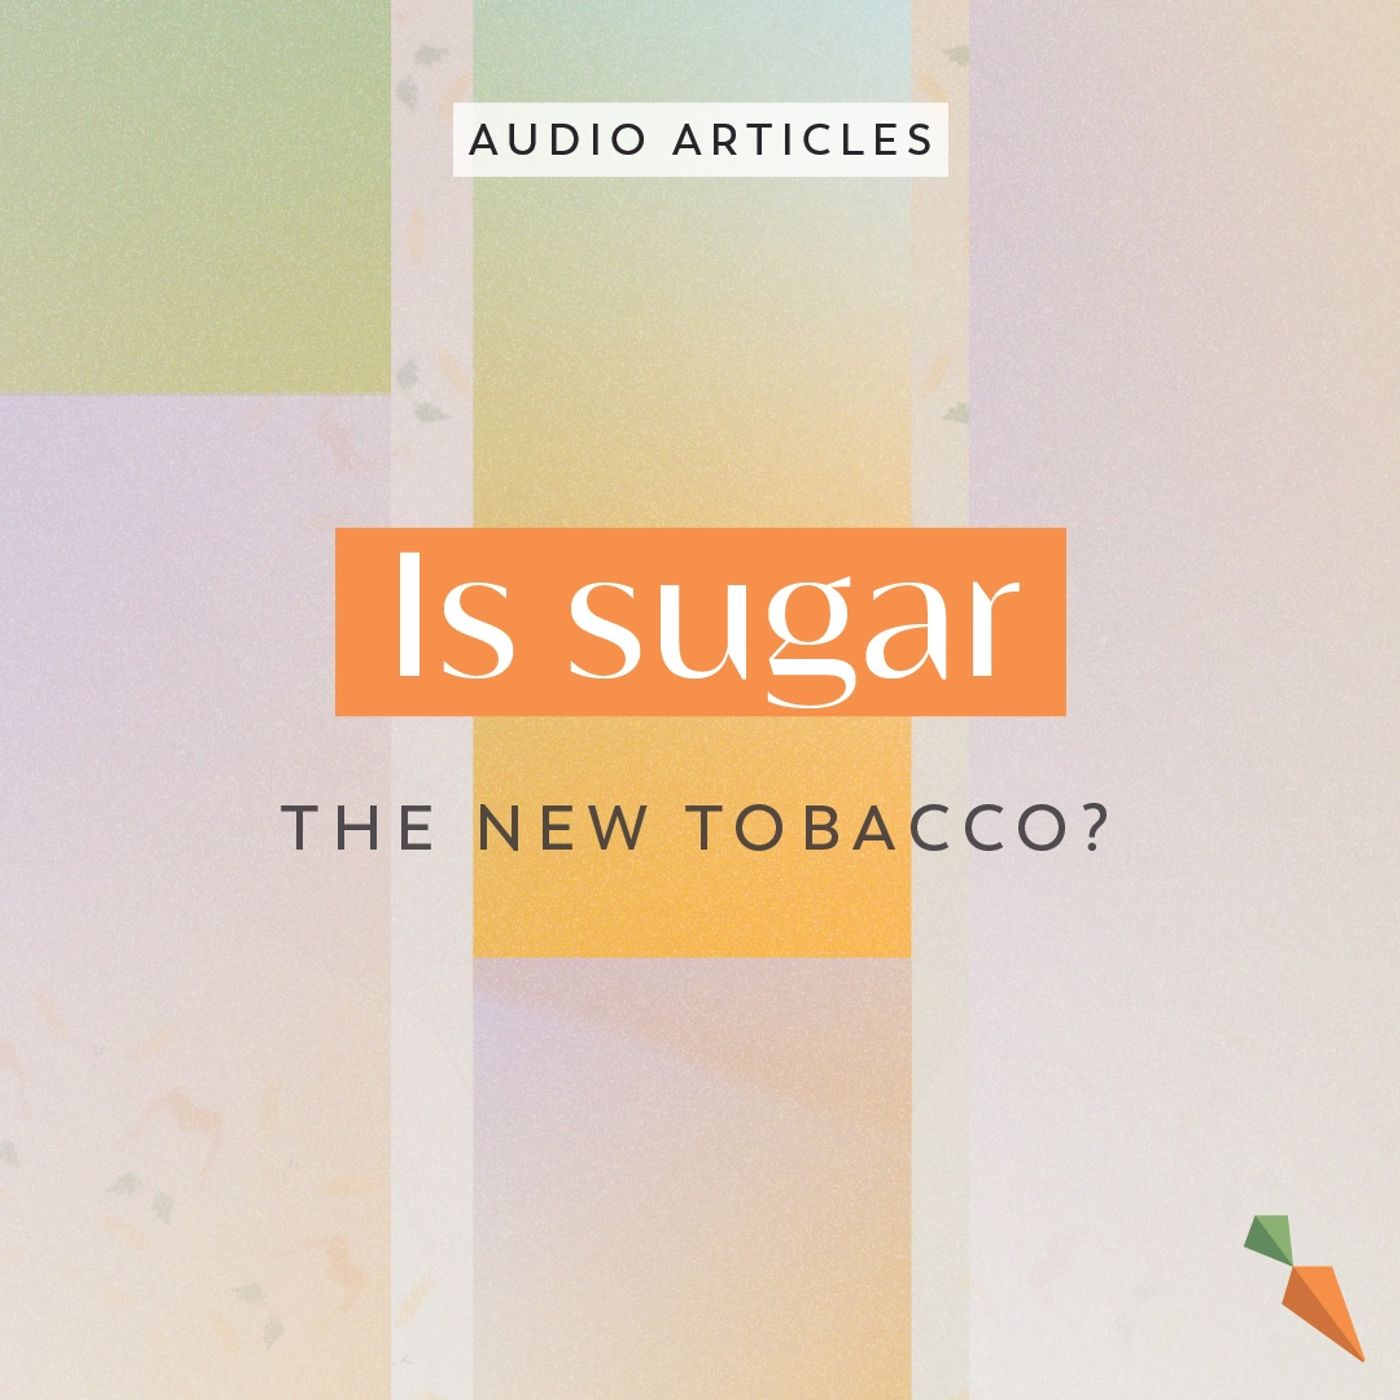 Is Sugar The New Tobacco? | FoodUnfolded AudioArticle